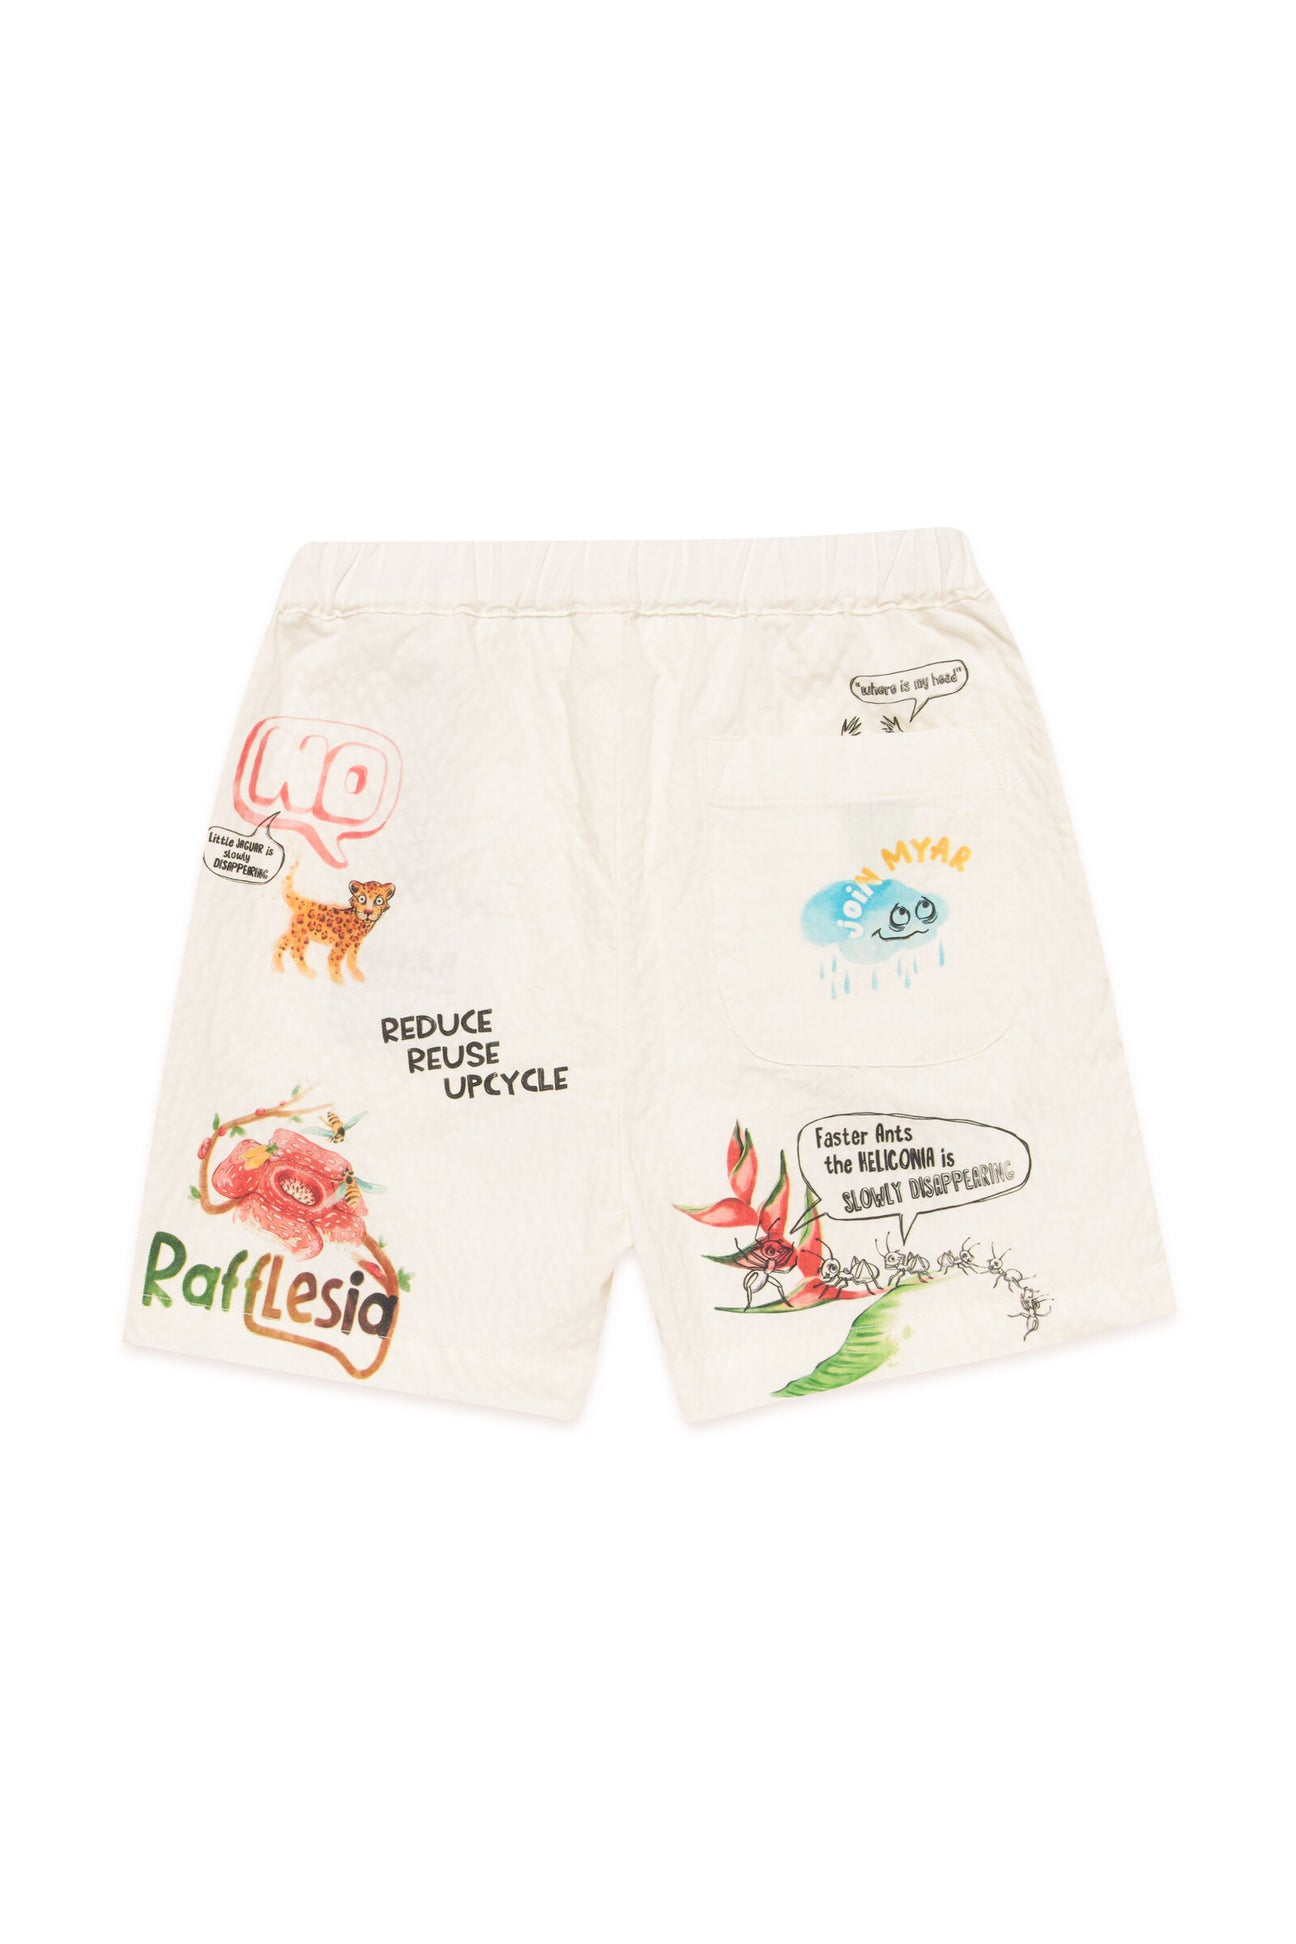 Deadstock white shorts with digital prints Deadstock white shorts with digital prints